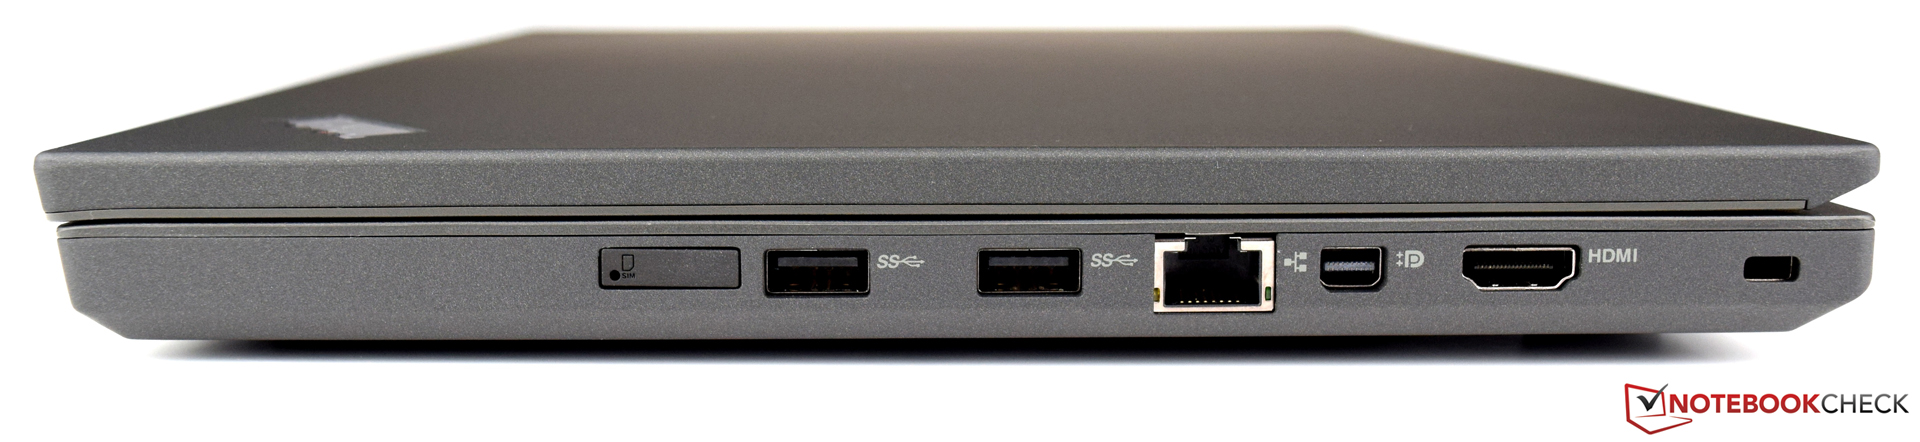 Lenovo thinkpad with hdmi port when did apple stop putting dvd drives in macbook pro